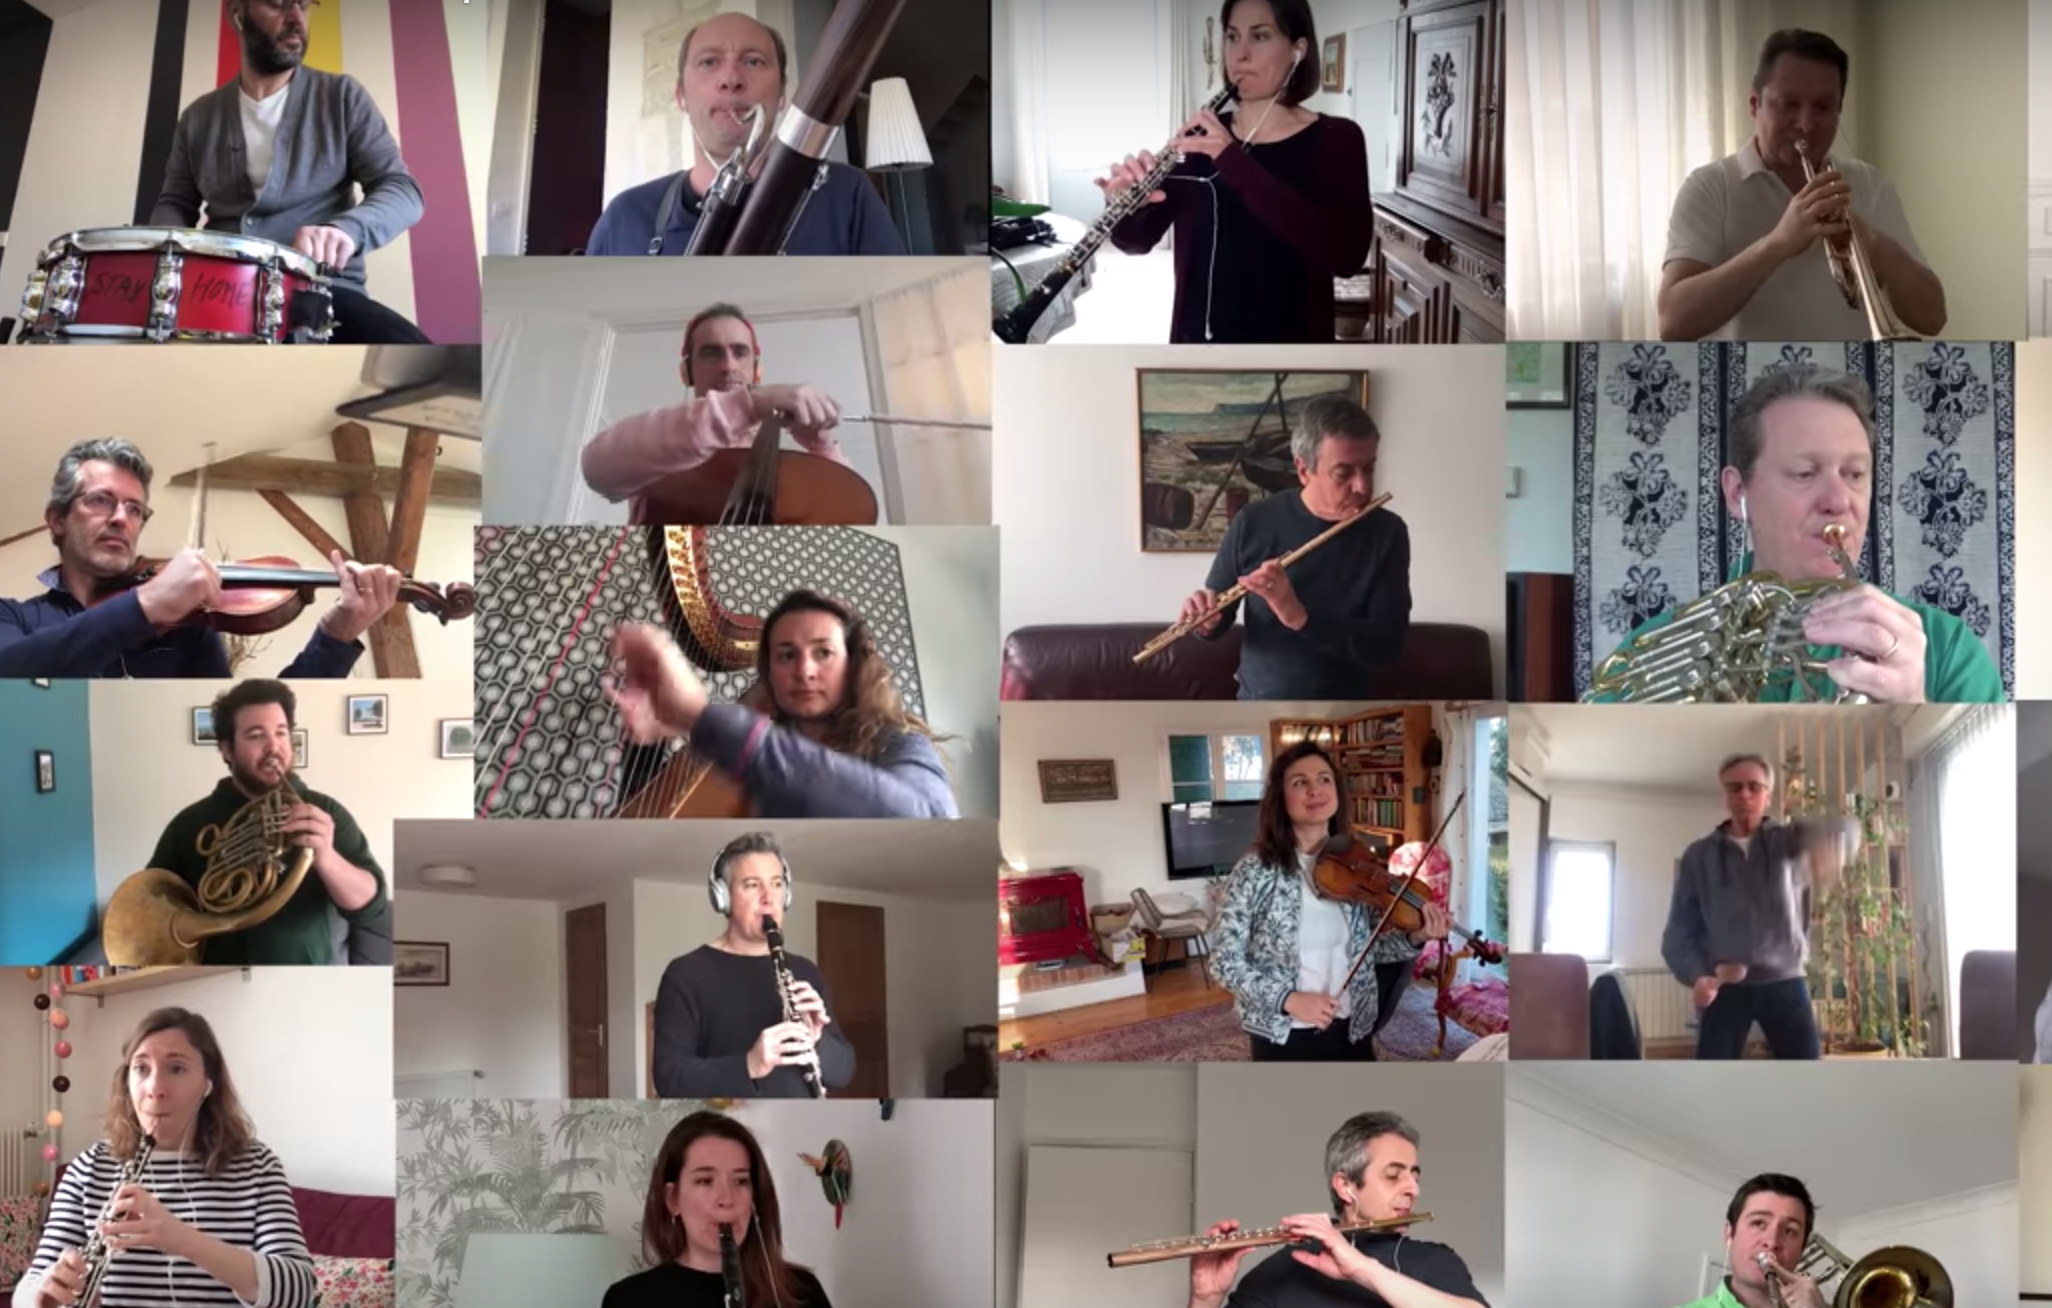 Montage of musicians from the National Orchestra of France